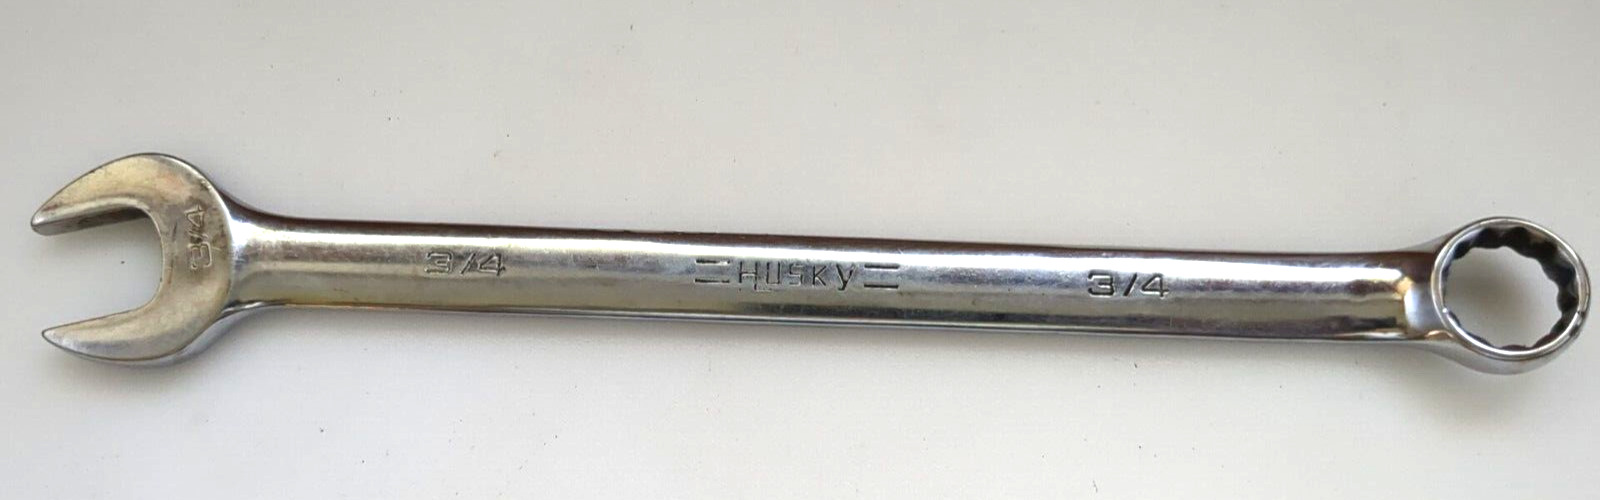 Vintage Husky 37024 Combination Wrench 3/4